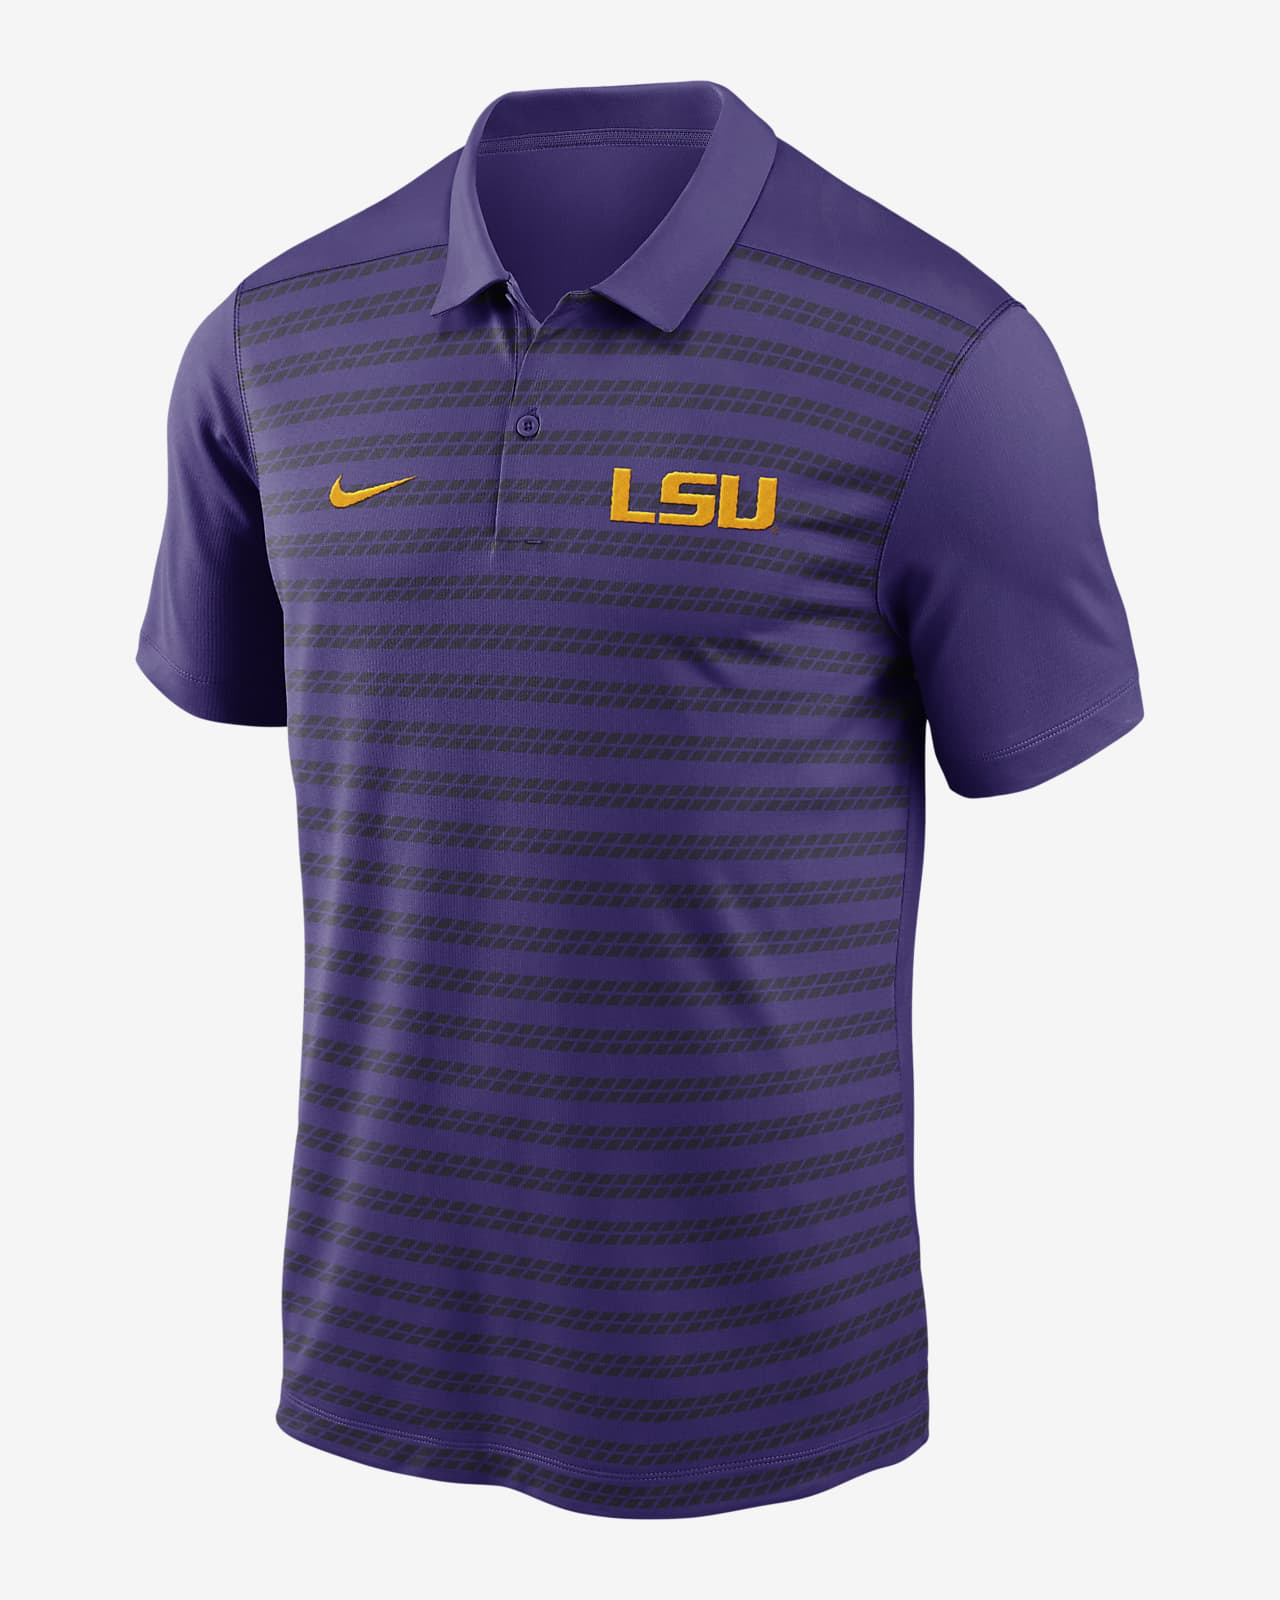 LSU Tigers Sideline Victory Men's Nike Dri-FIT College Polo